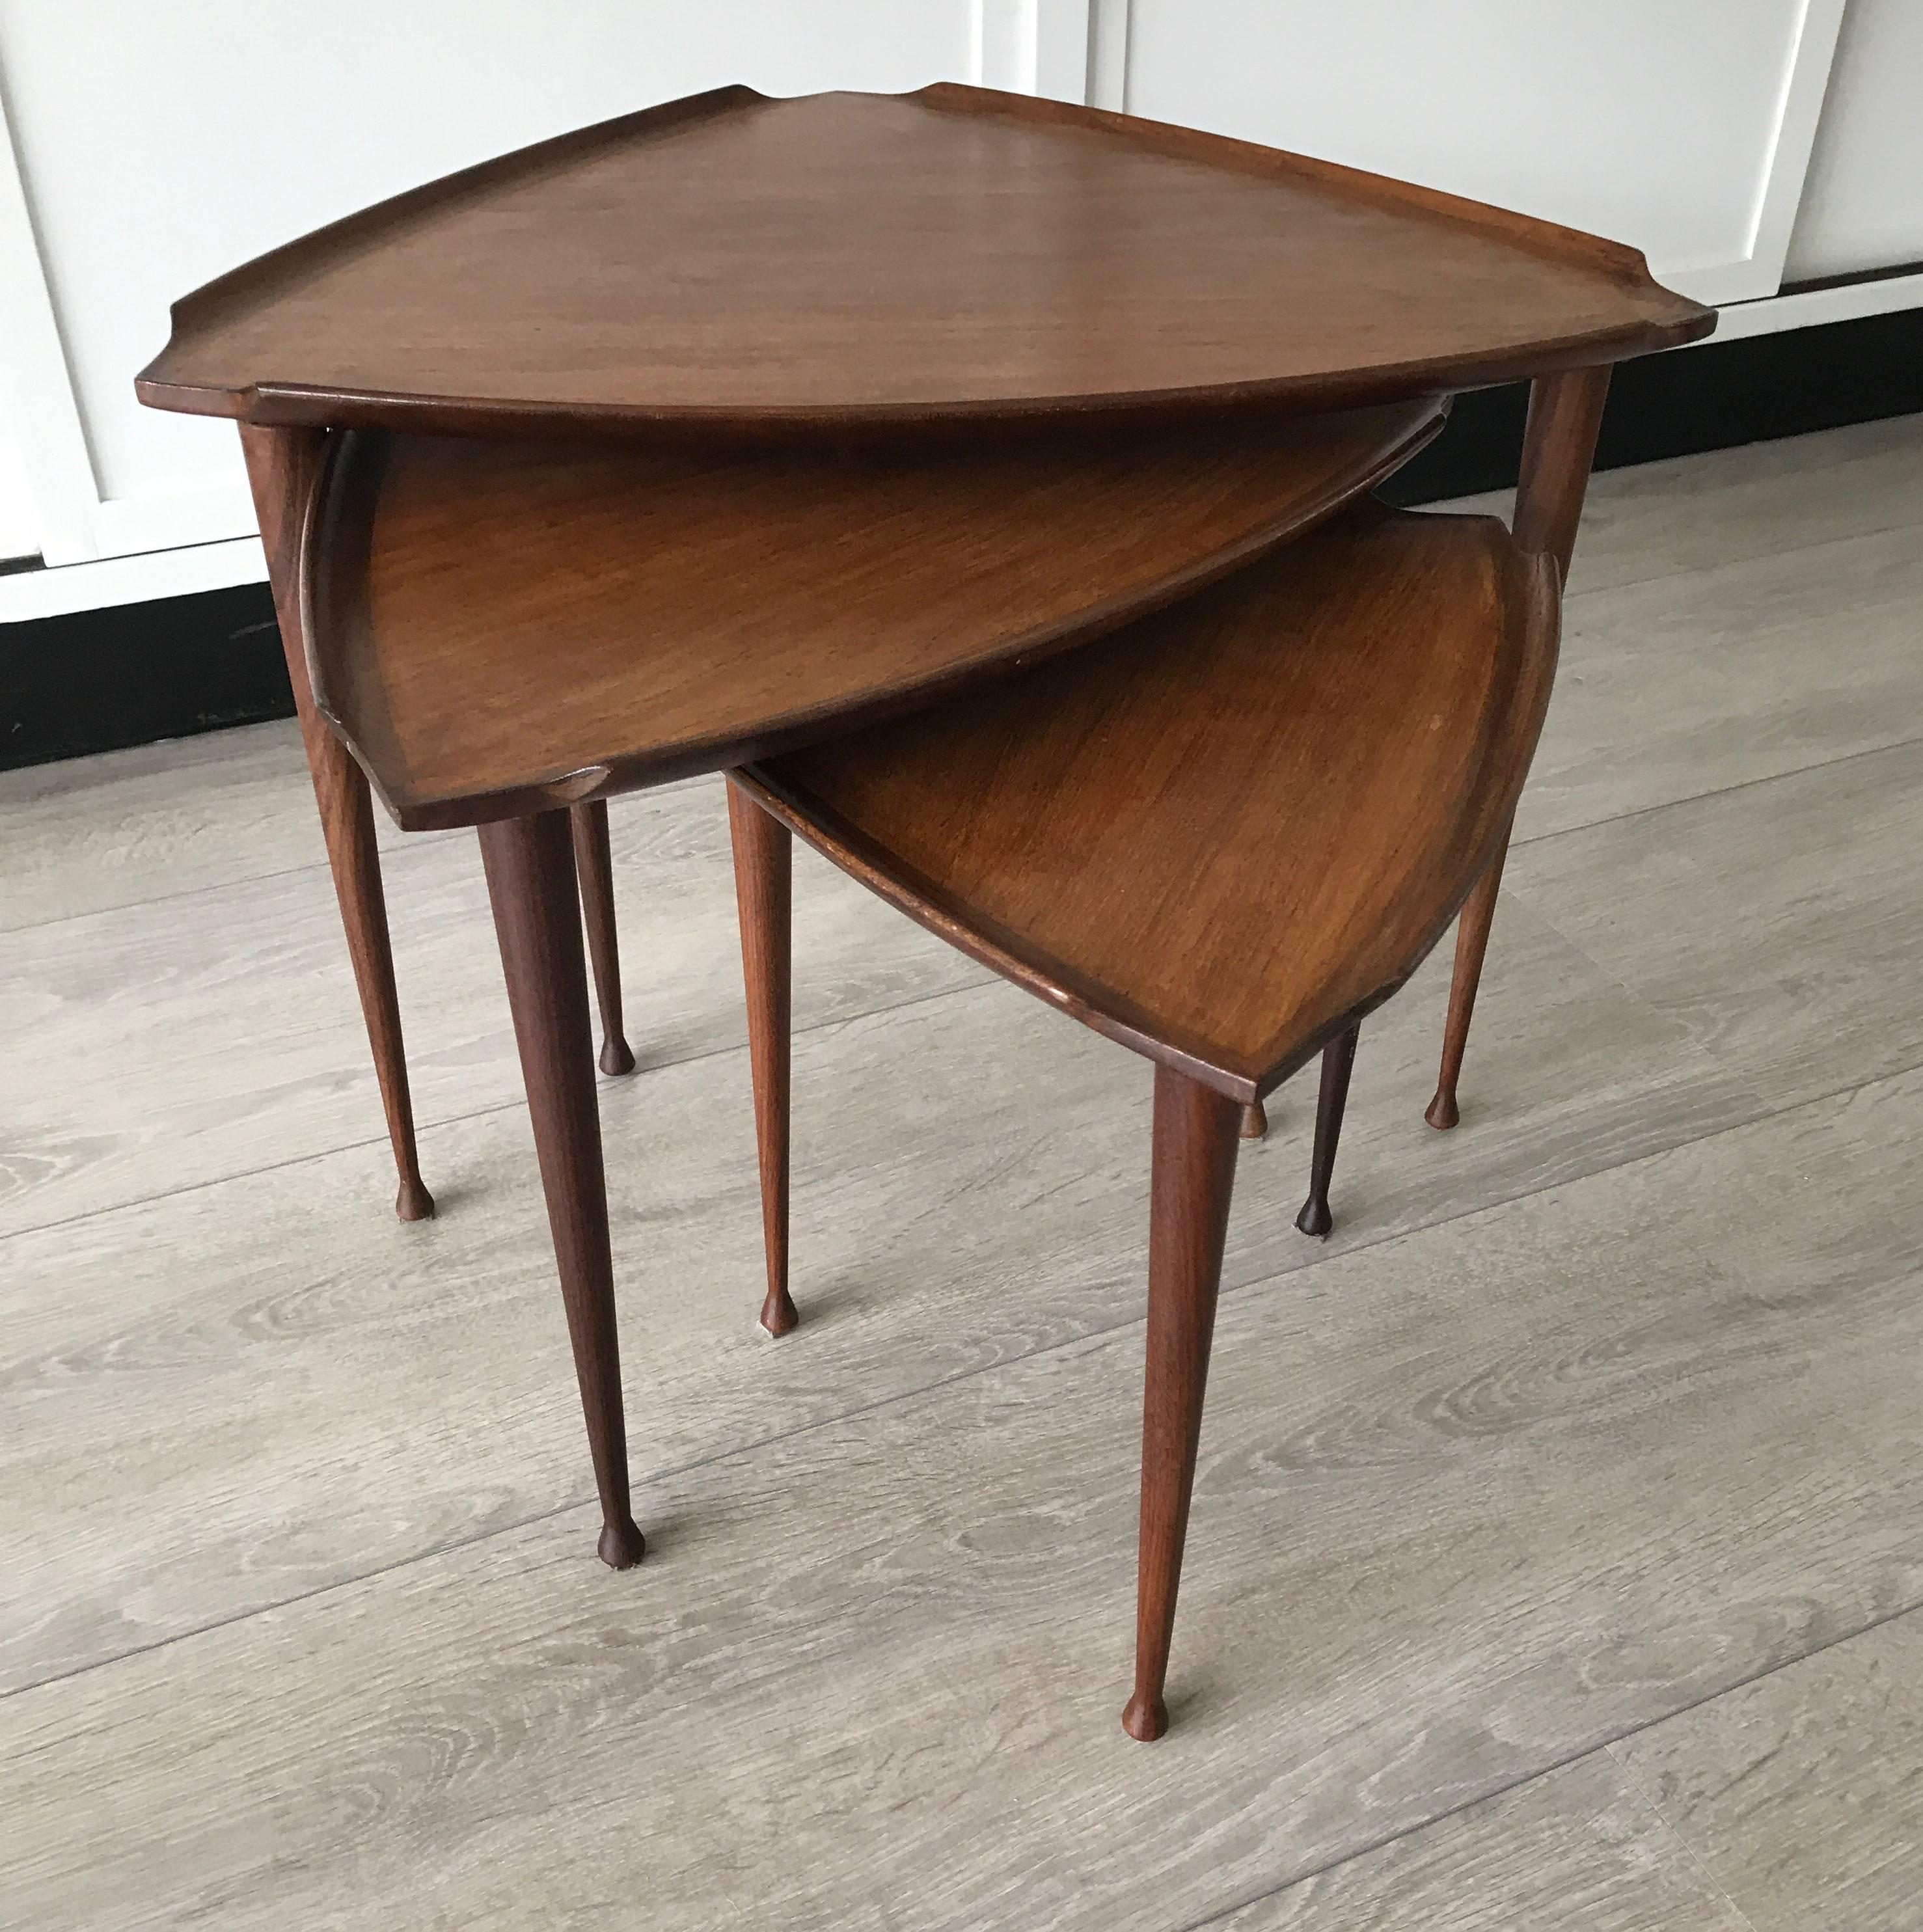 Good quality and great Scandinavian design nest of tables.

This, 1960s Danish nest of tables is of beautiful quality and design. The combination of the light colors, the surfboard shaped edges and the elegant legs make this set an absolute joy to